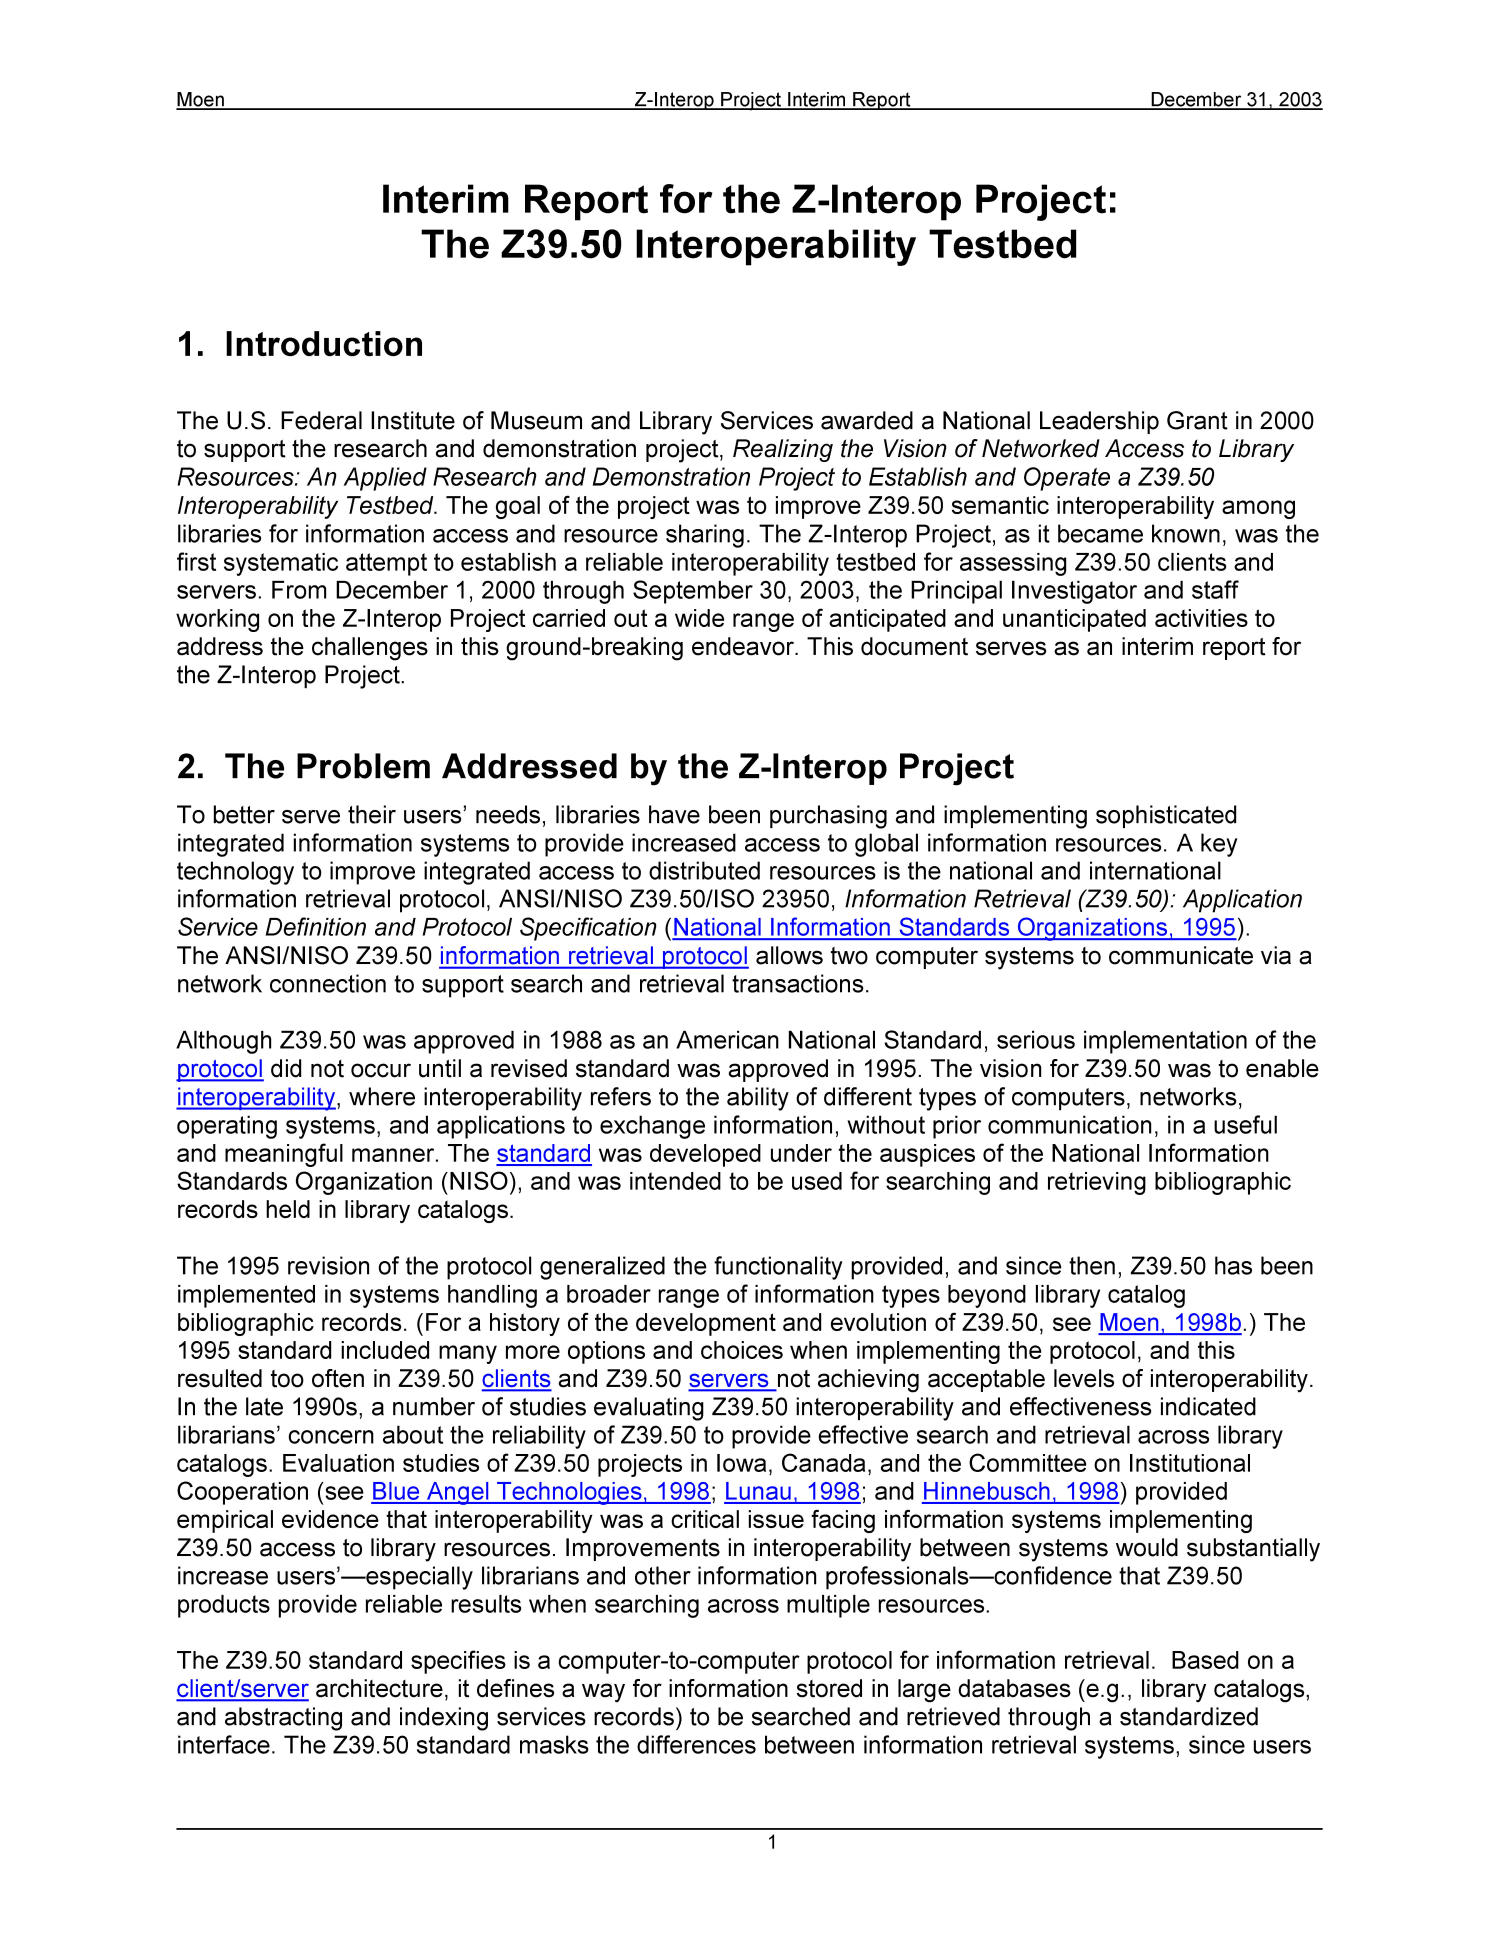 Interim Report for the Z-Interop Project The Z39.50 Interoperability Testbed
                                                
                                                    1
                                                